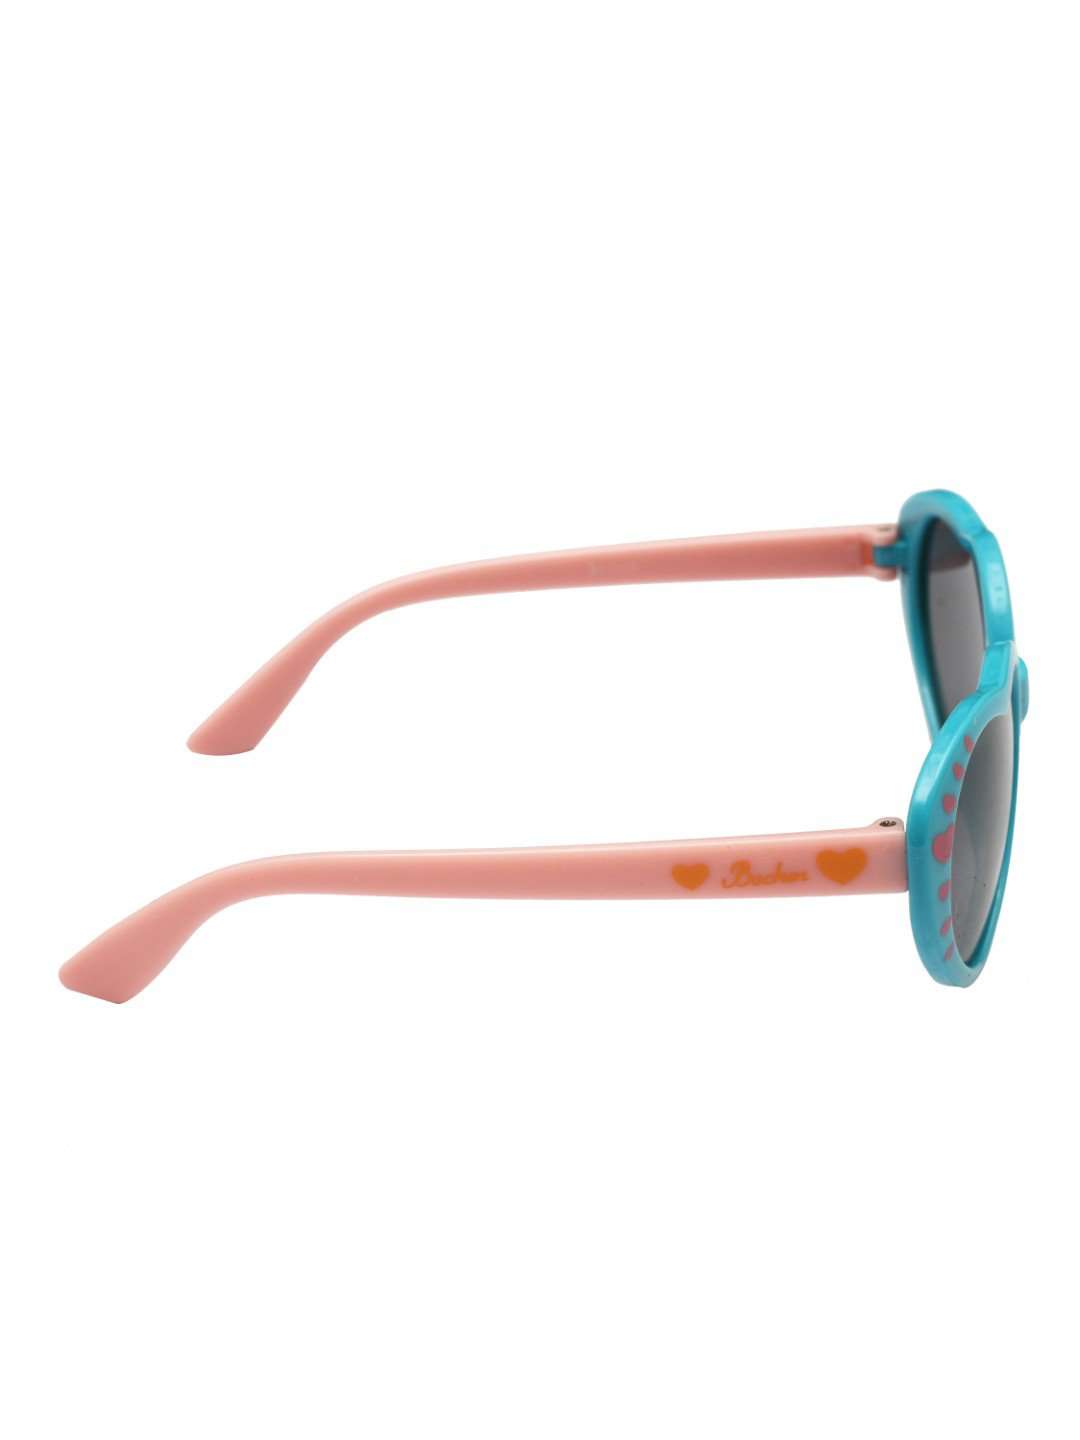 Stol'n Kids Blue and Pink Heart Sunglasses - SWHF